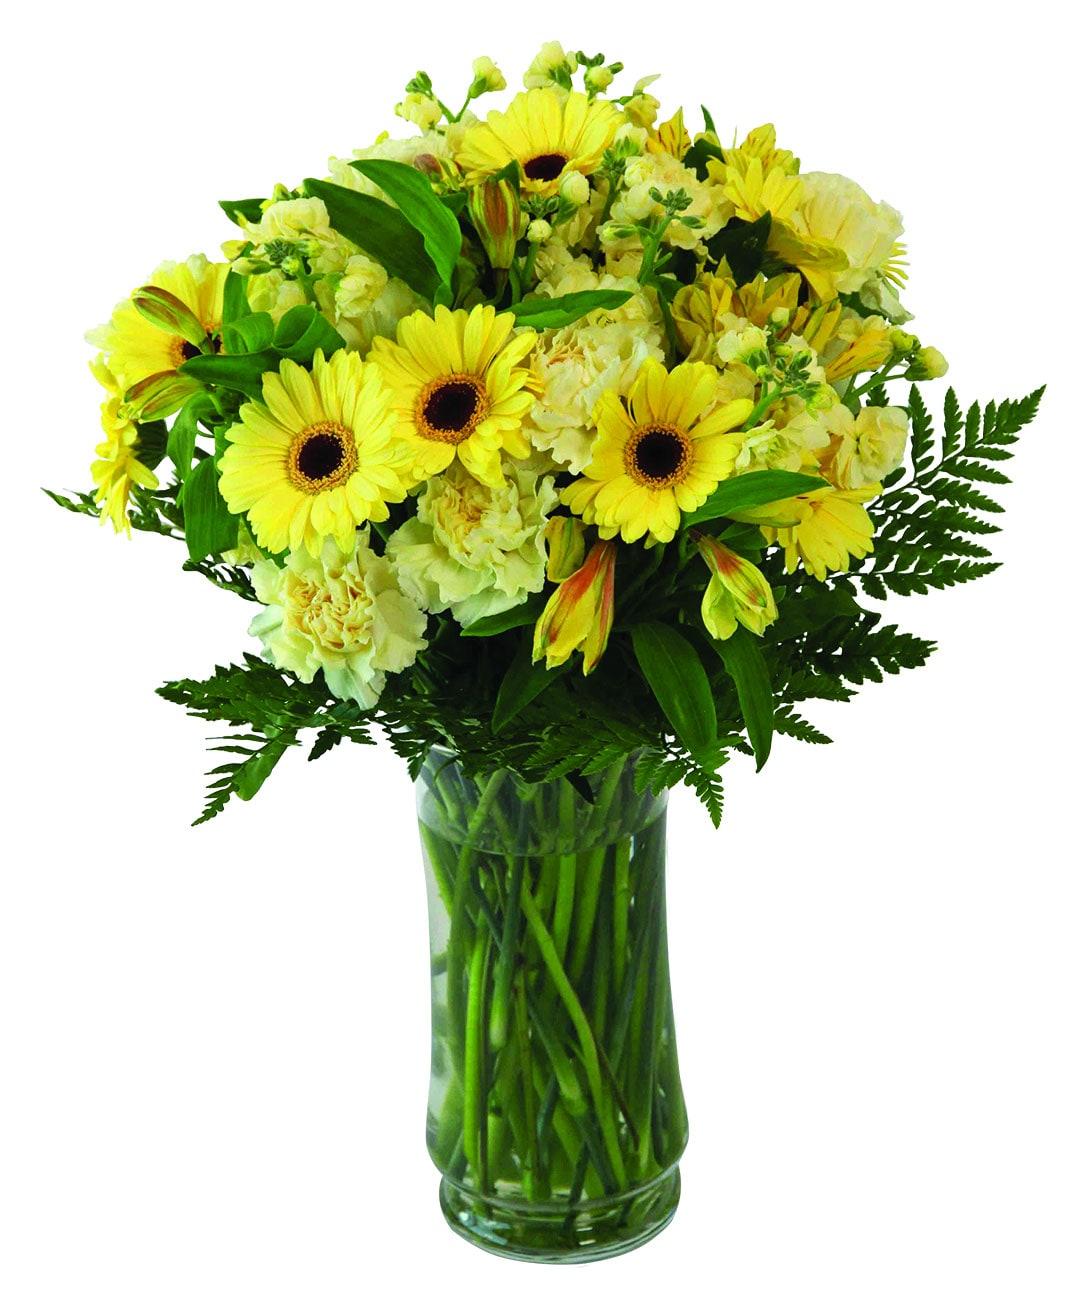 A vase arrangement with yellow alstromeria, carnations, gerberas, greens and fillers.